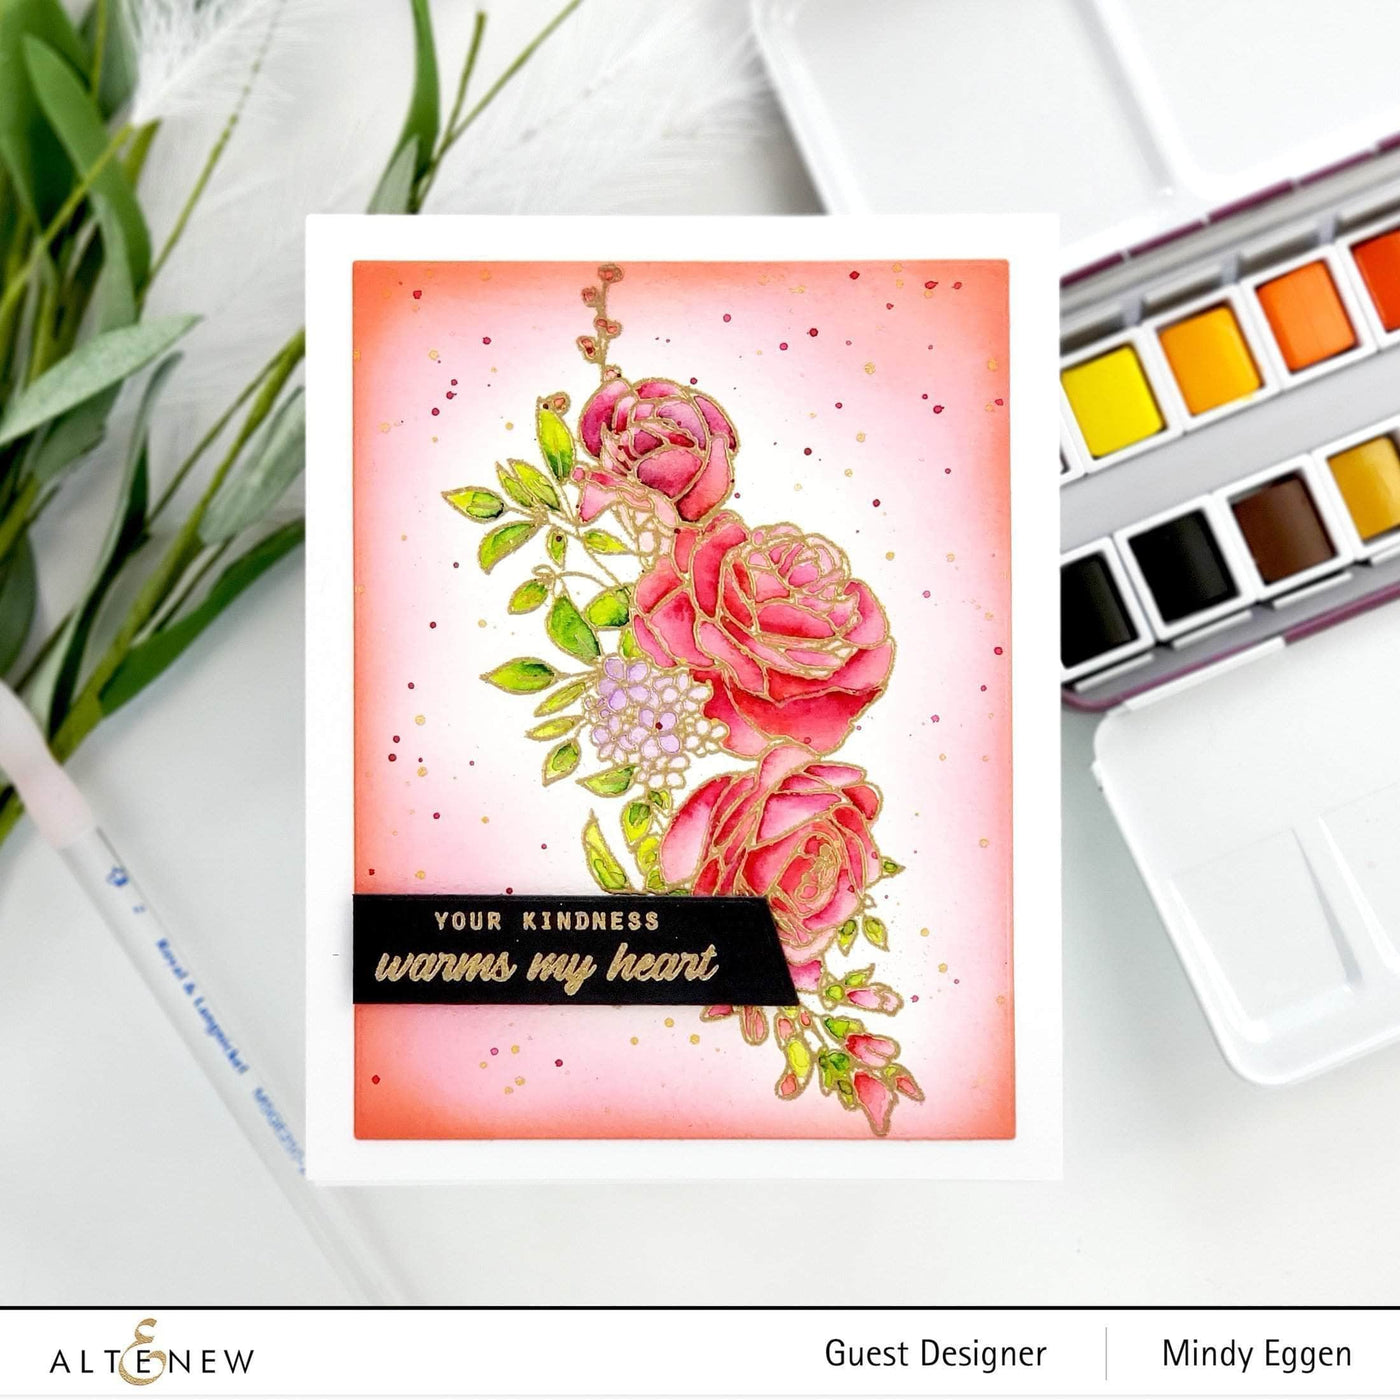 Clear Stamps Paint-A-Flower: Rose Outline Stamp Set